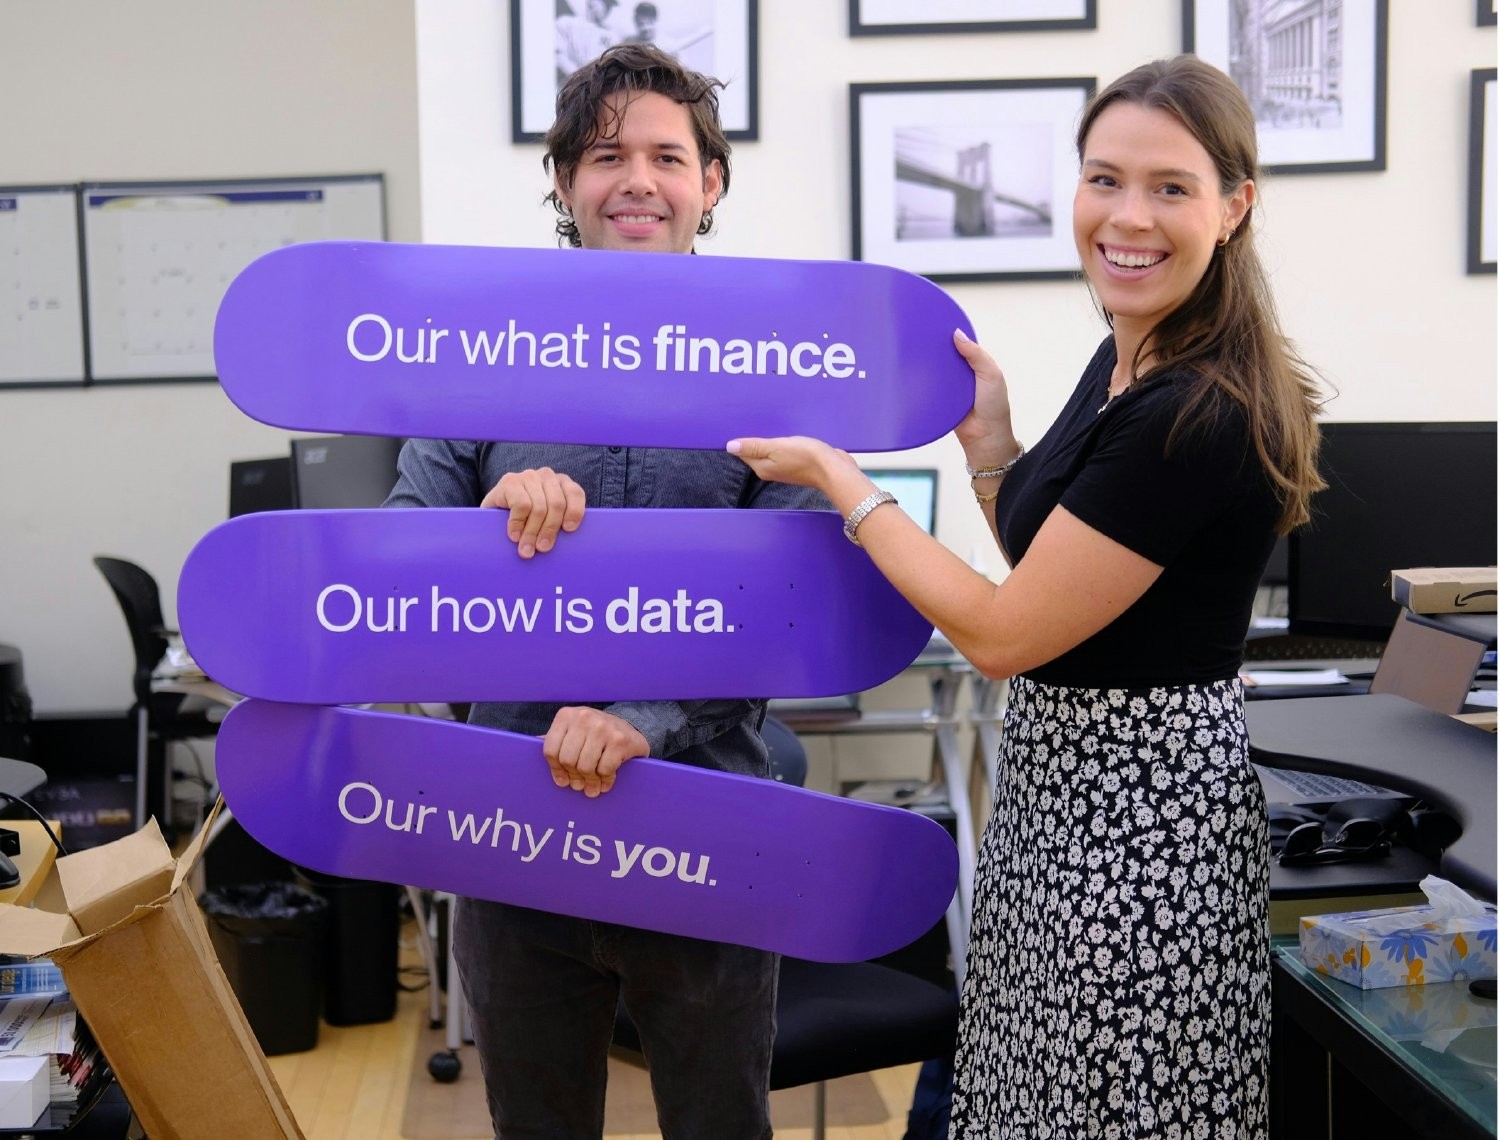 Our what is finance.
Our how is data.
Our why is you.